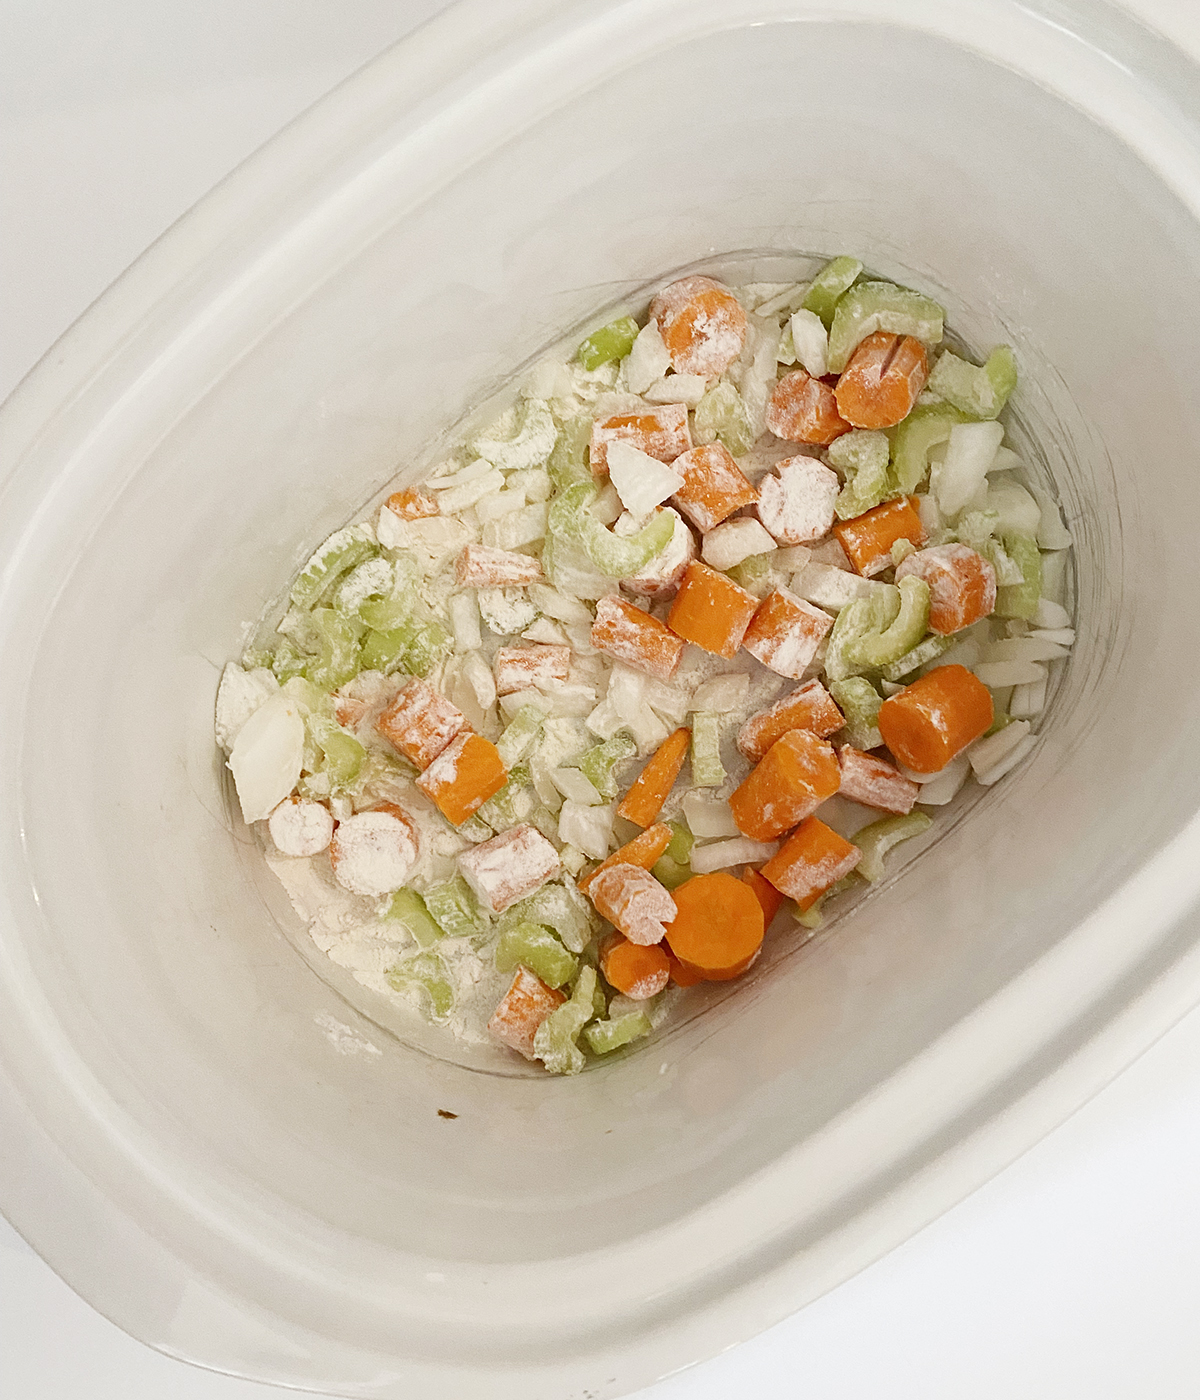 Vegetables mixed with flour in the slow cooker.